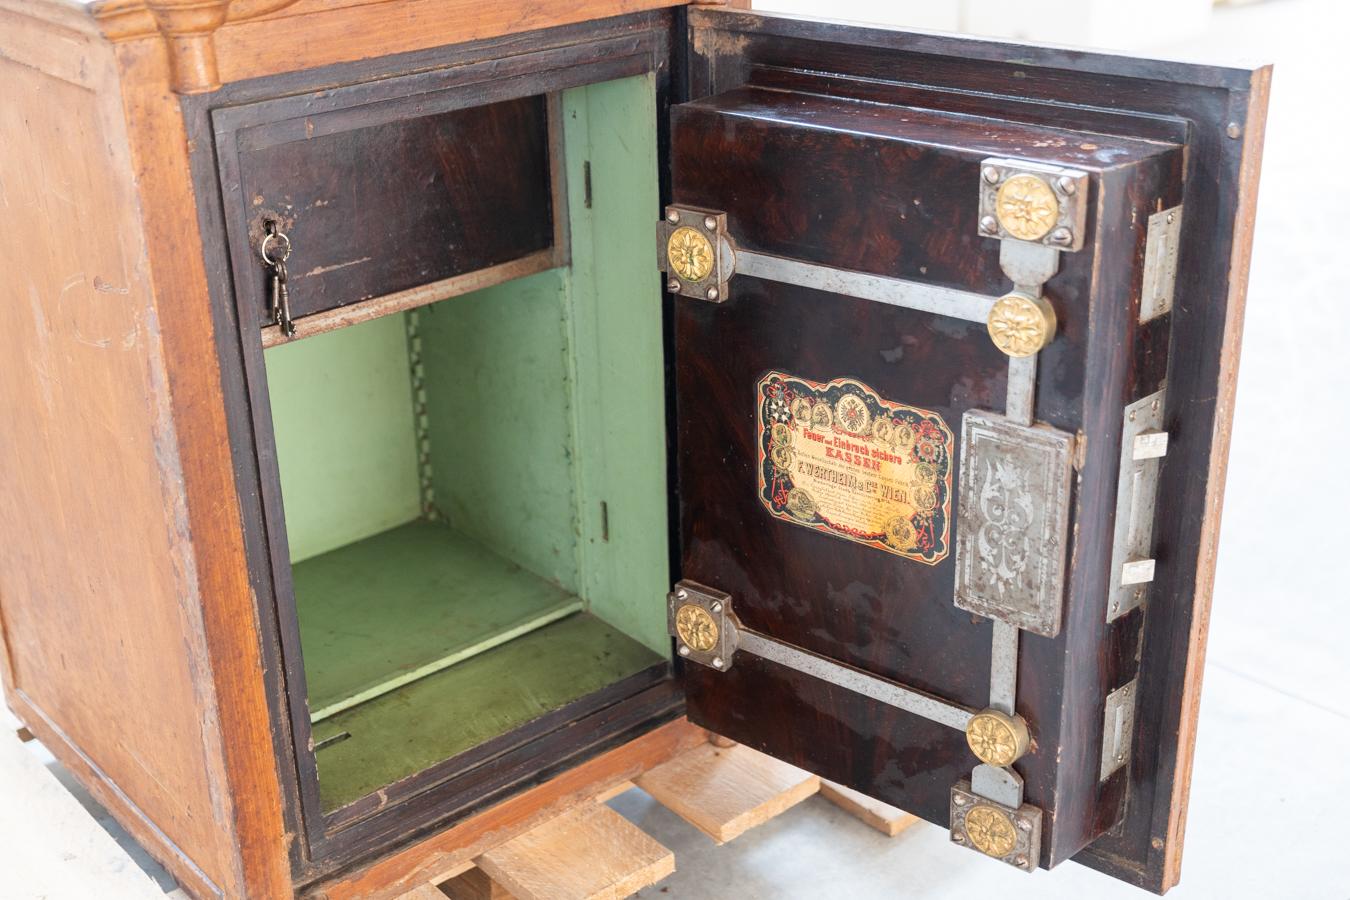 Austro-Hungarian period safe F. WERTHEIM & C. with key, 1800s For Sale 11